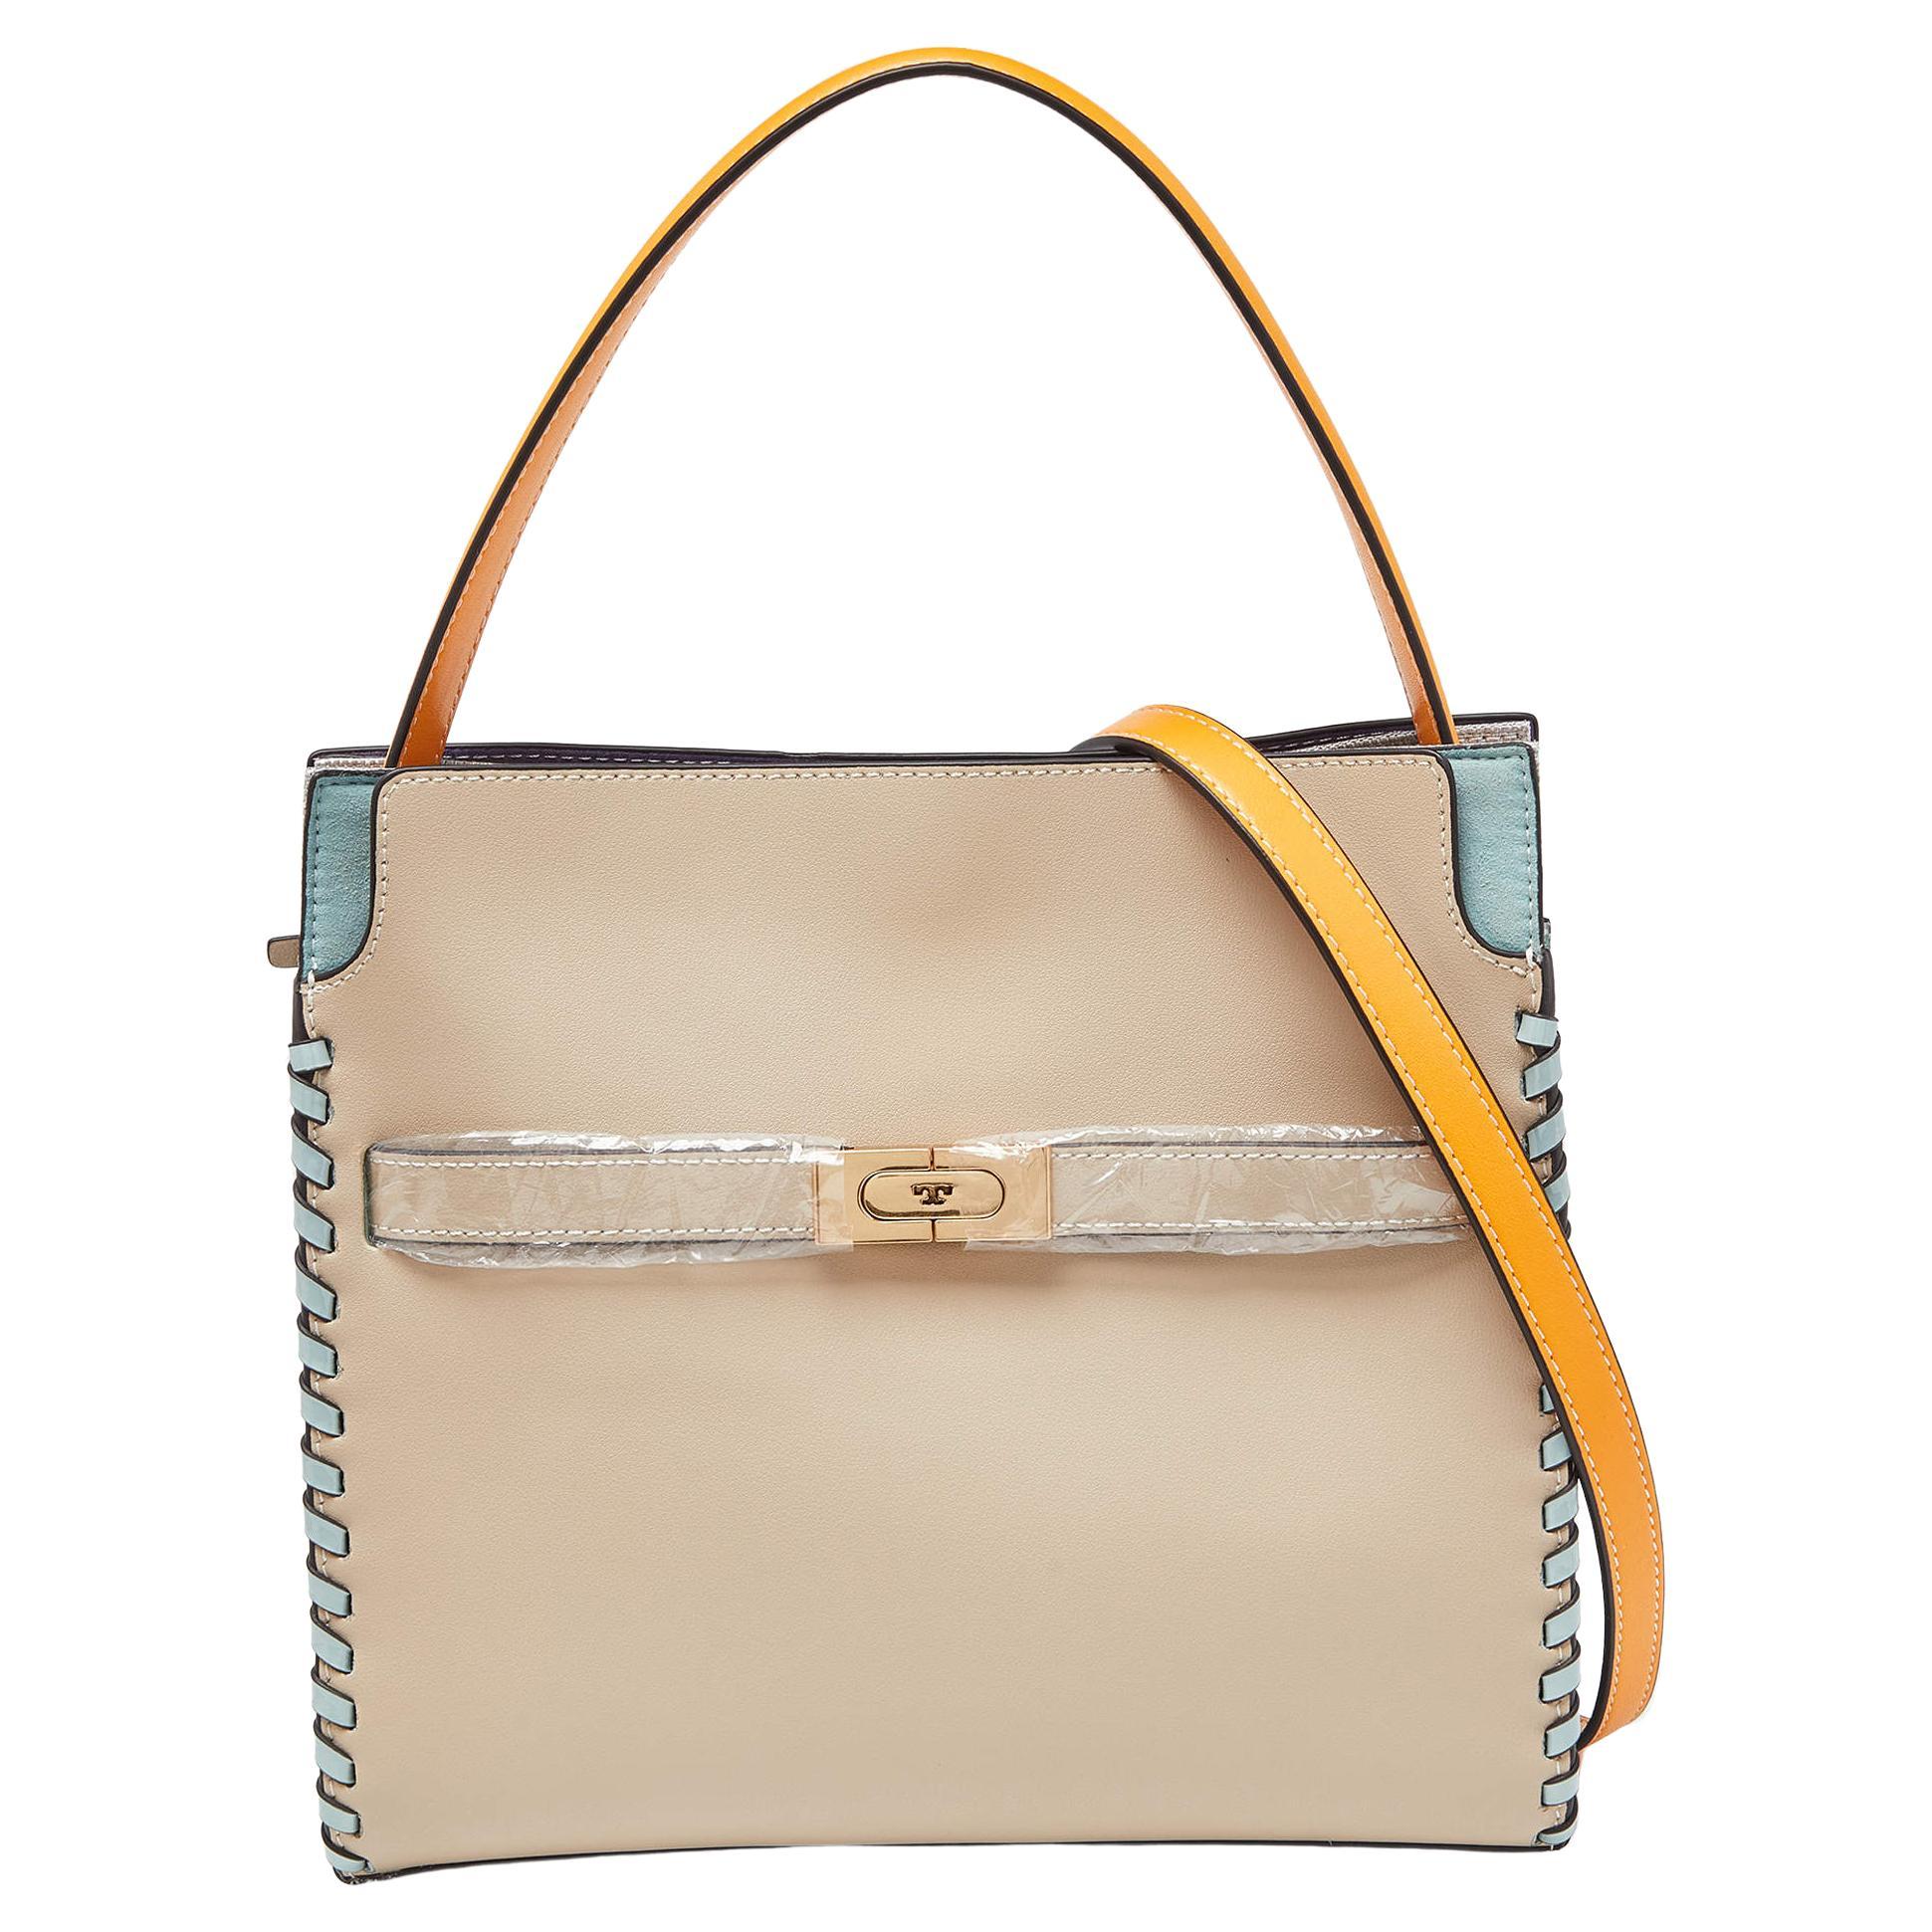 Tory Burch Multicolor Leather and Suede Small Lee Radziwill Whipstitch 